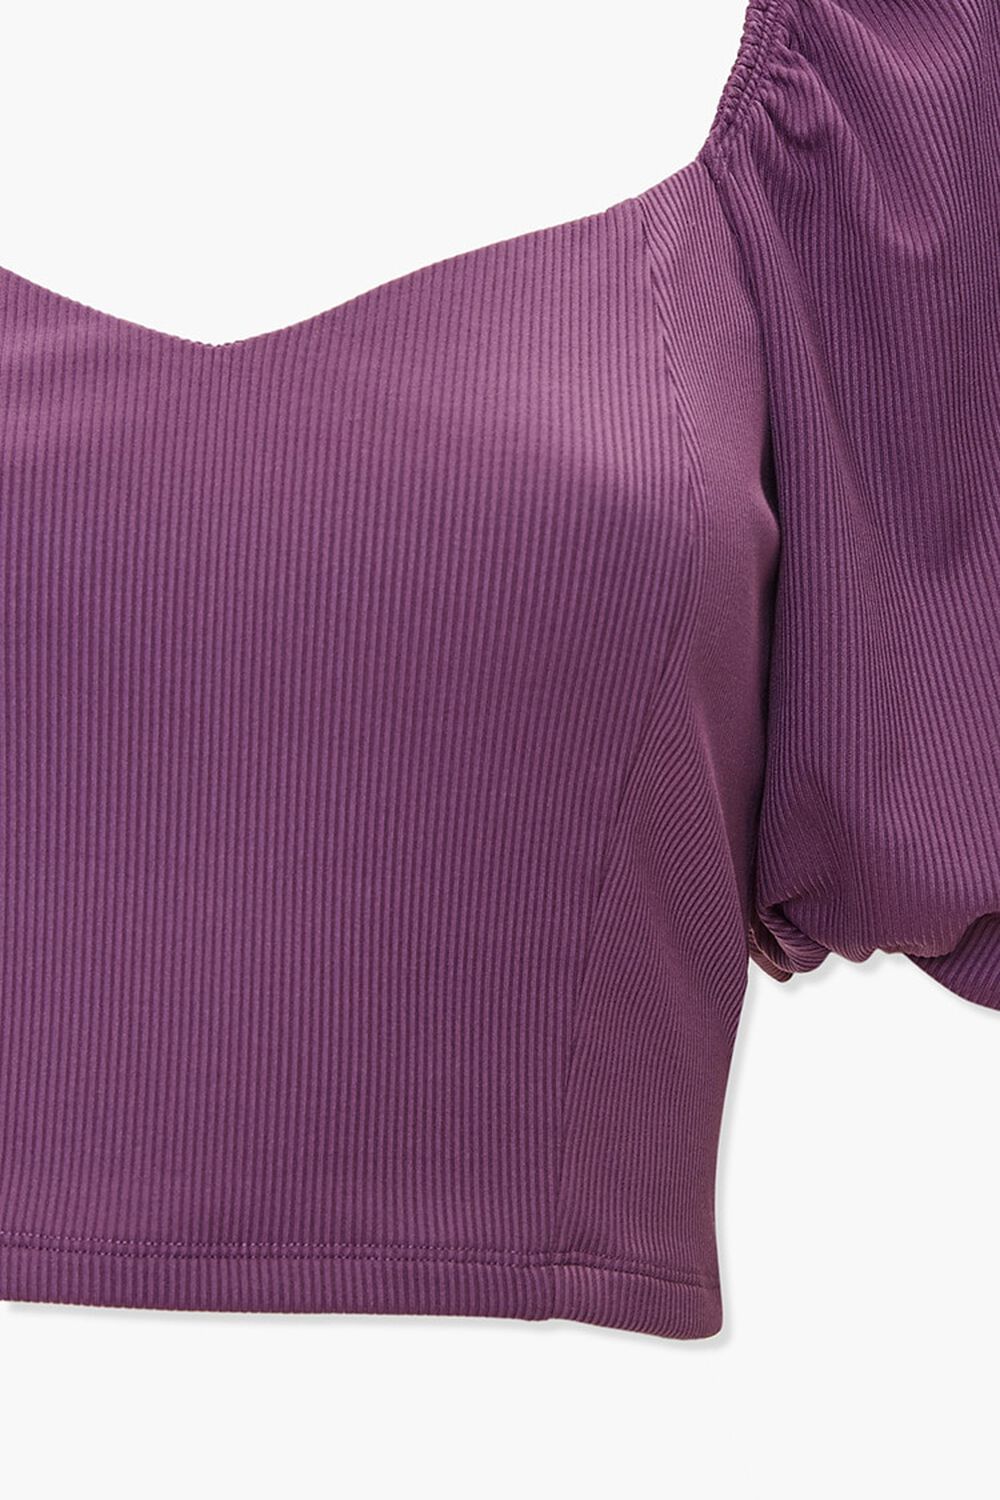 LAVENDER Ribbed Gathered-Sleeve Top, image 3